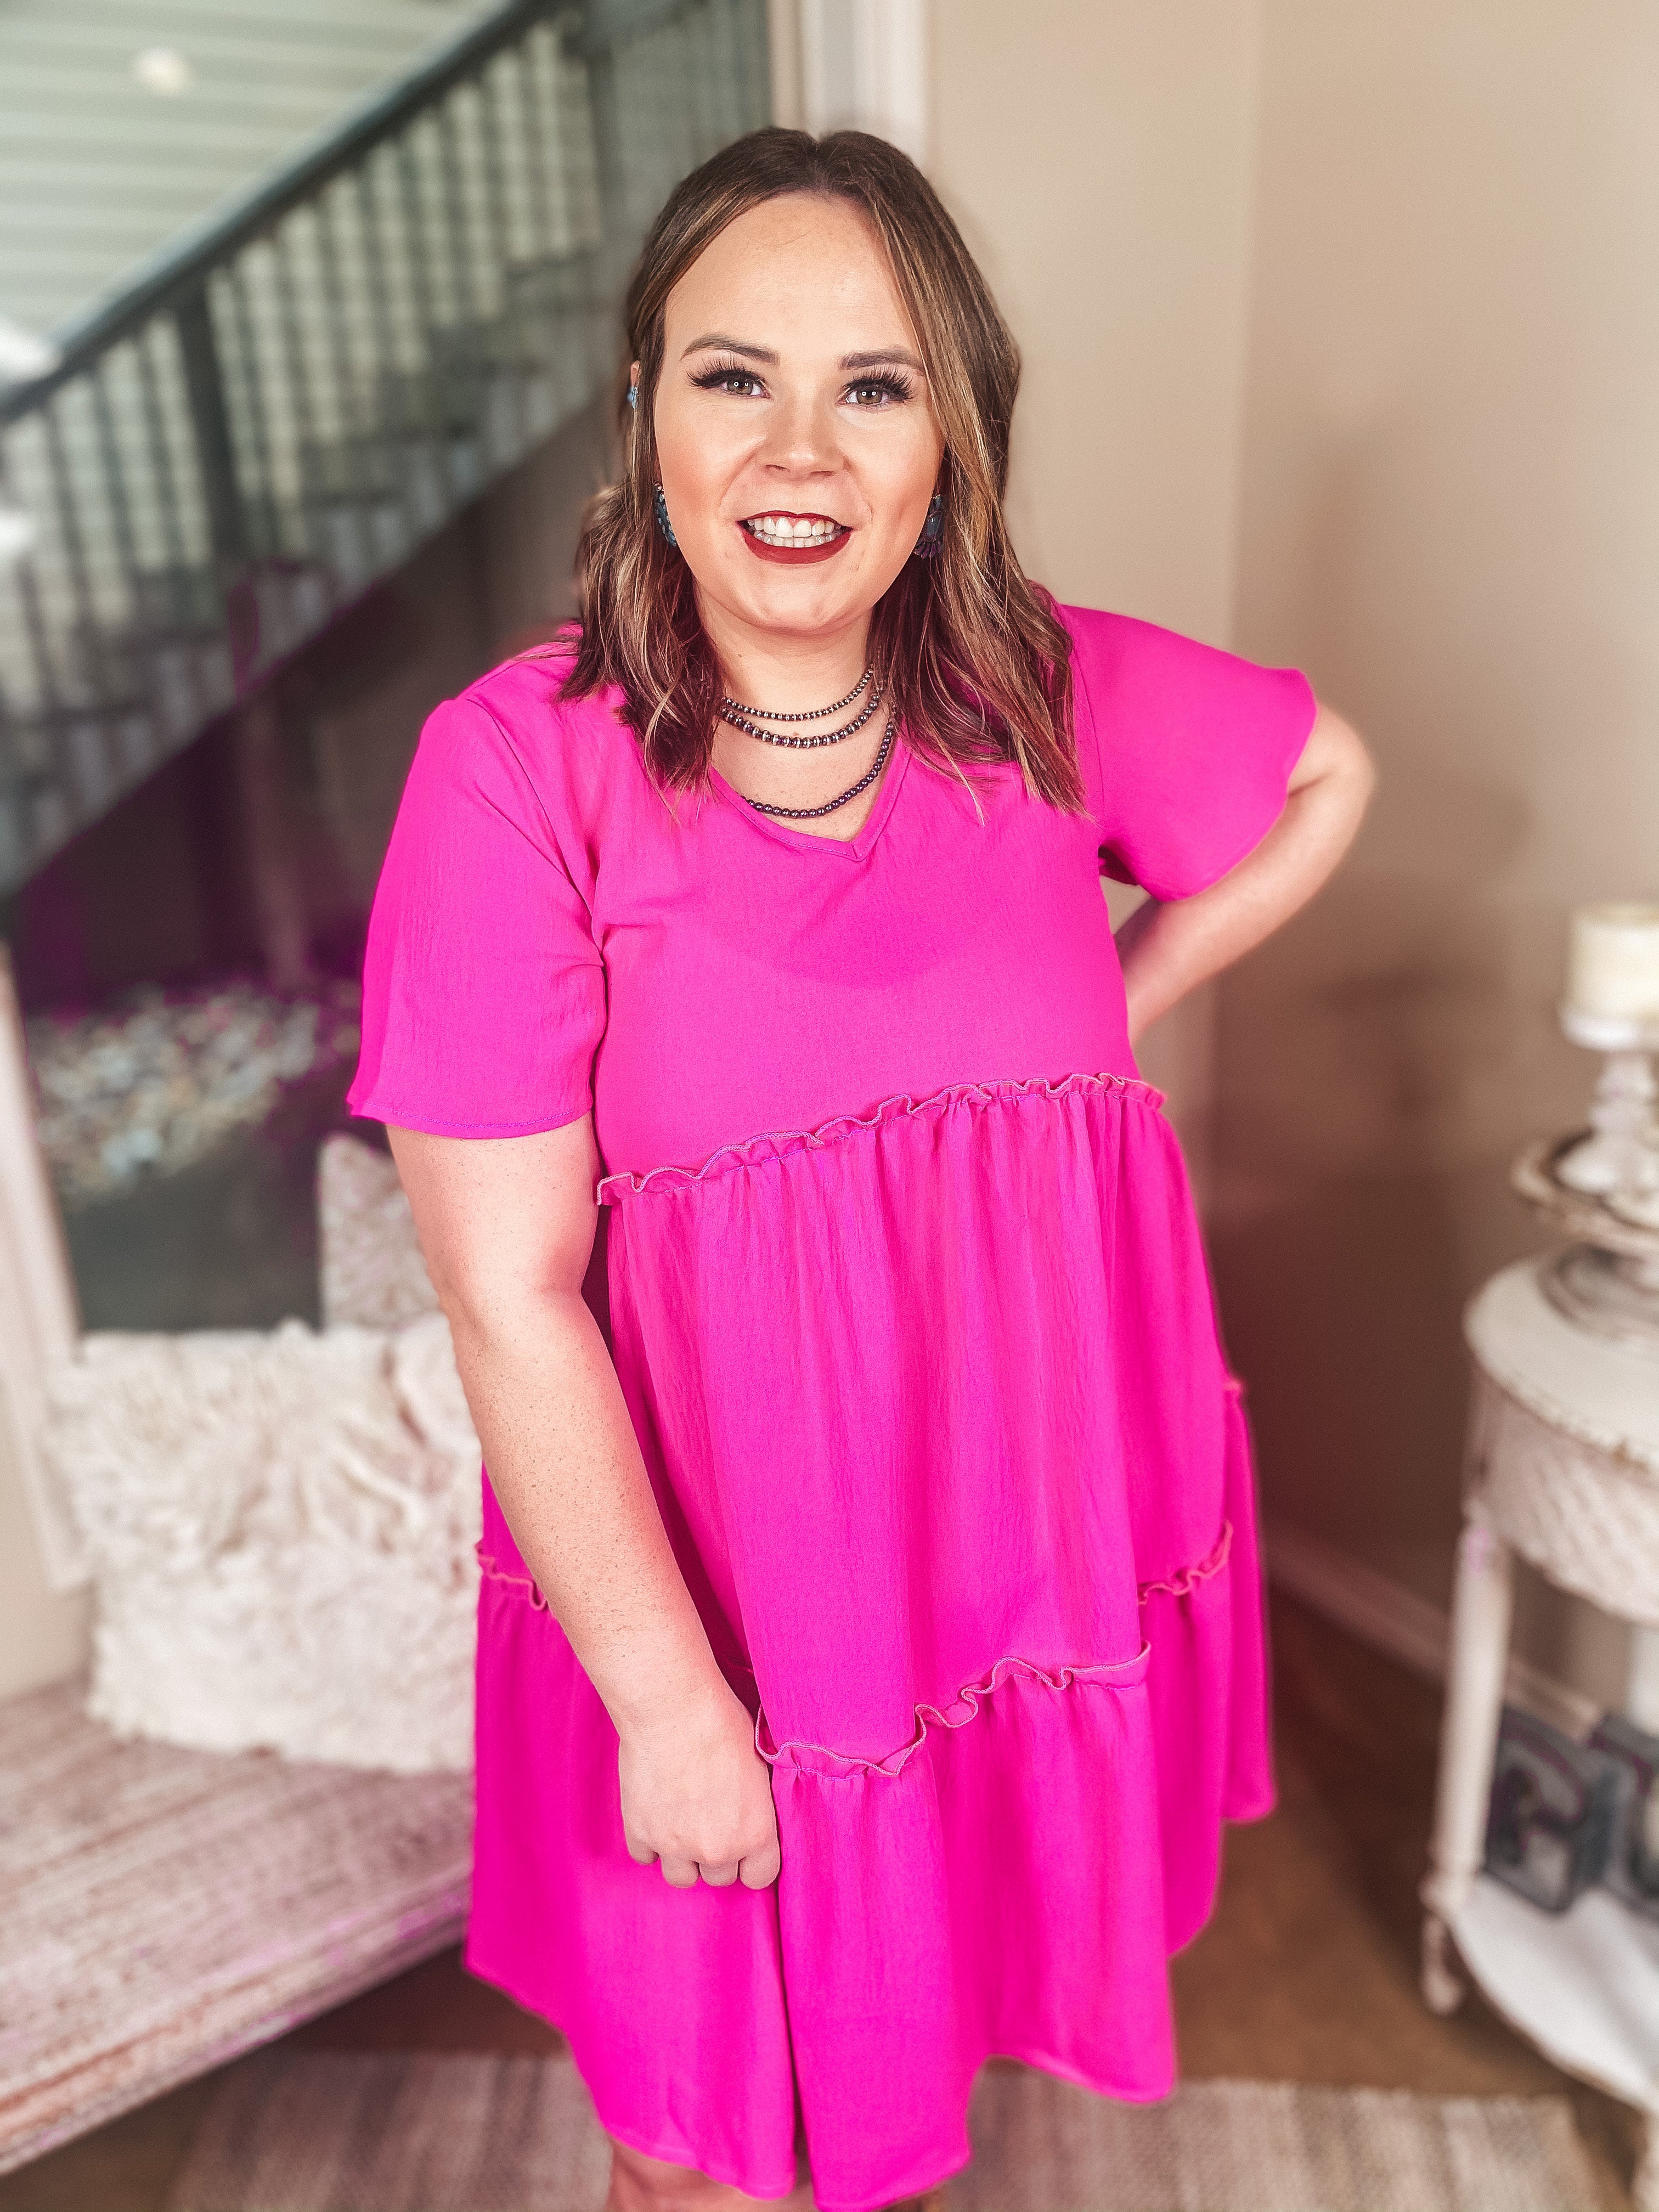 Waiting For Wednesday Short Sleeve Tiered Babydoll Dress in Fuchsia Pink - Giddy Up Glamour Boutique